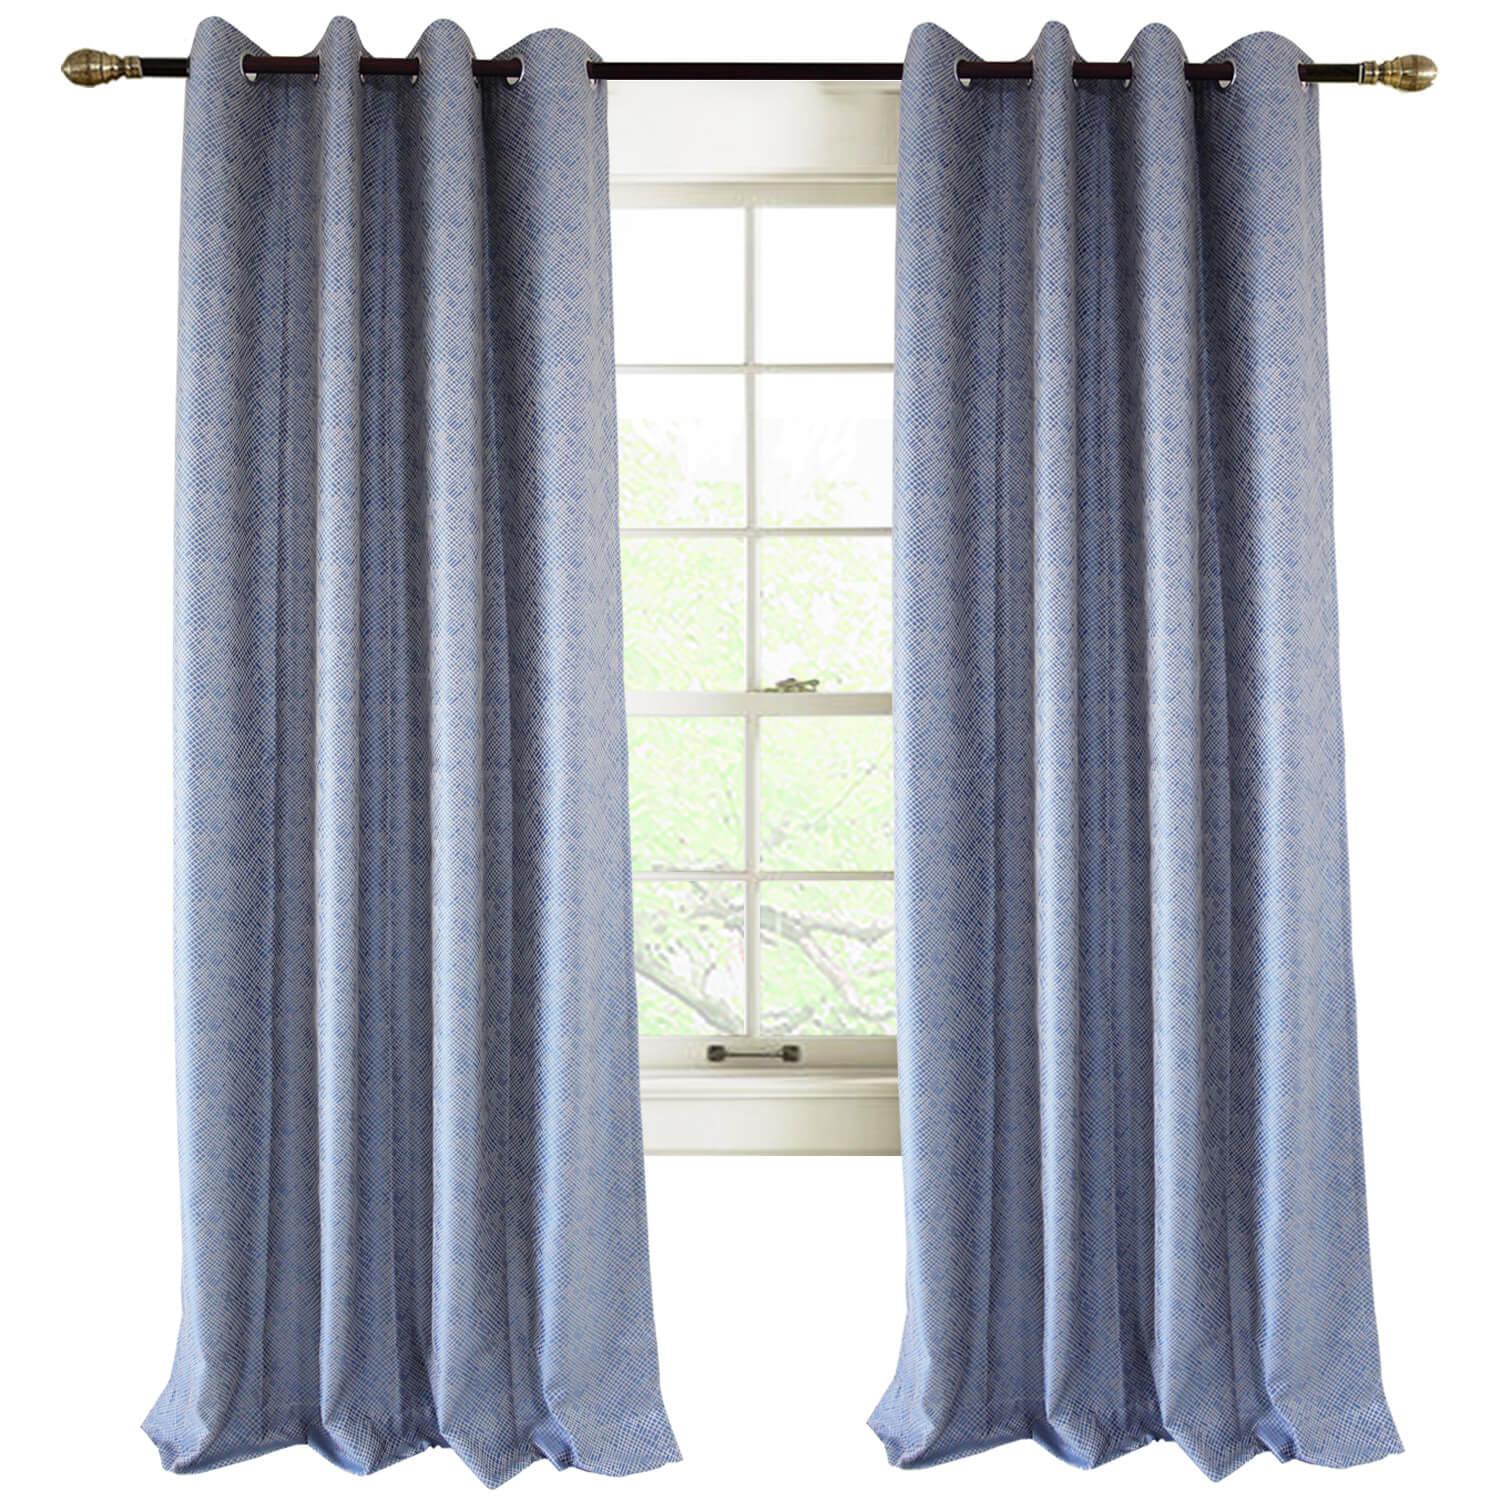 Cotton Soft Blue Curtains Small Texture Block Drapes 2 Panels for Bedroom - Anady Top Space Design